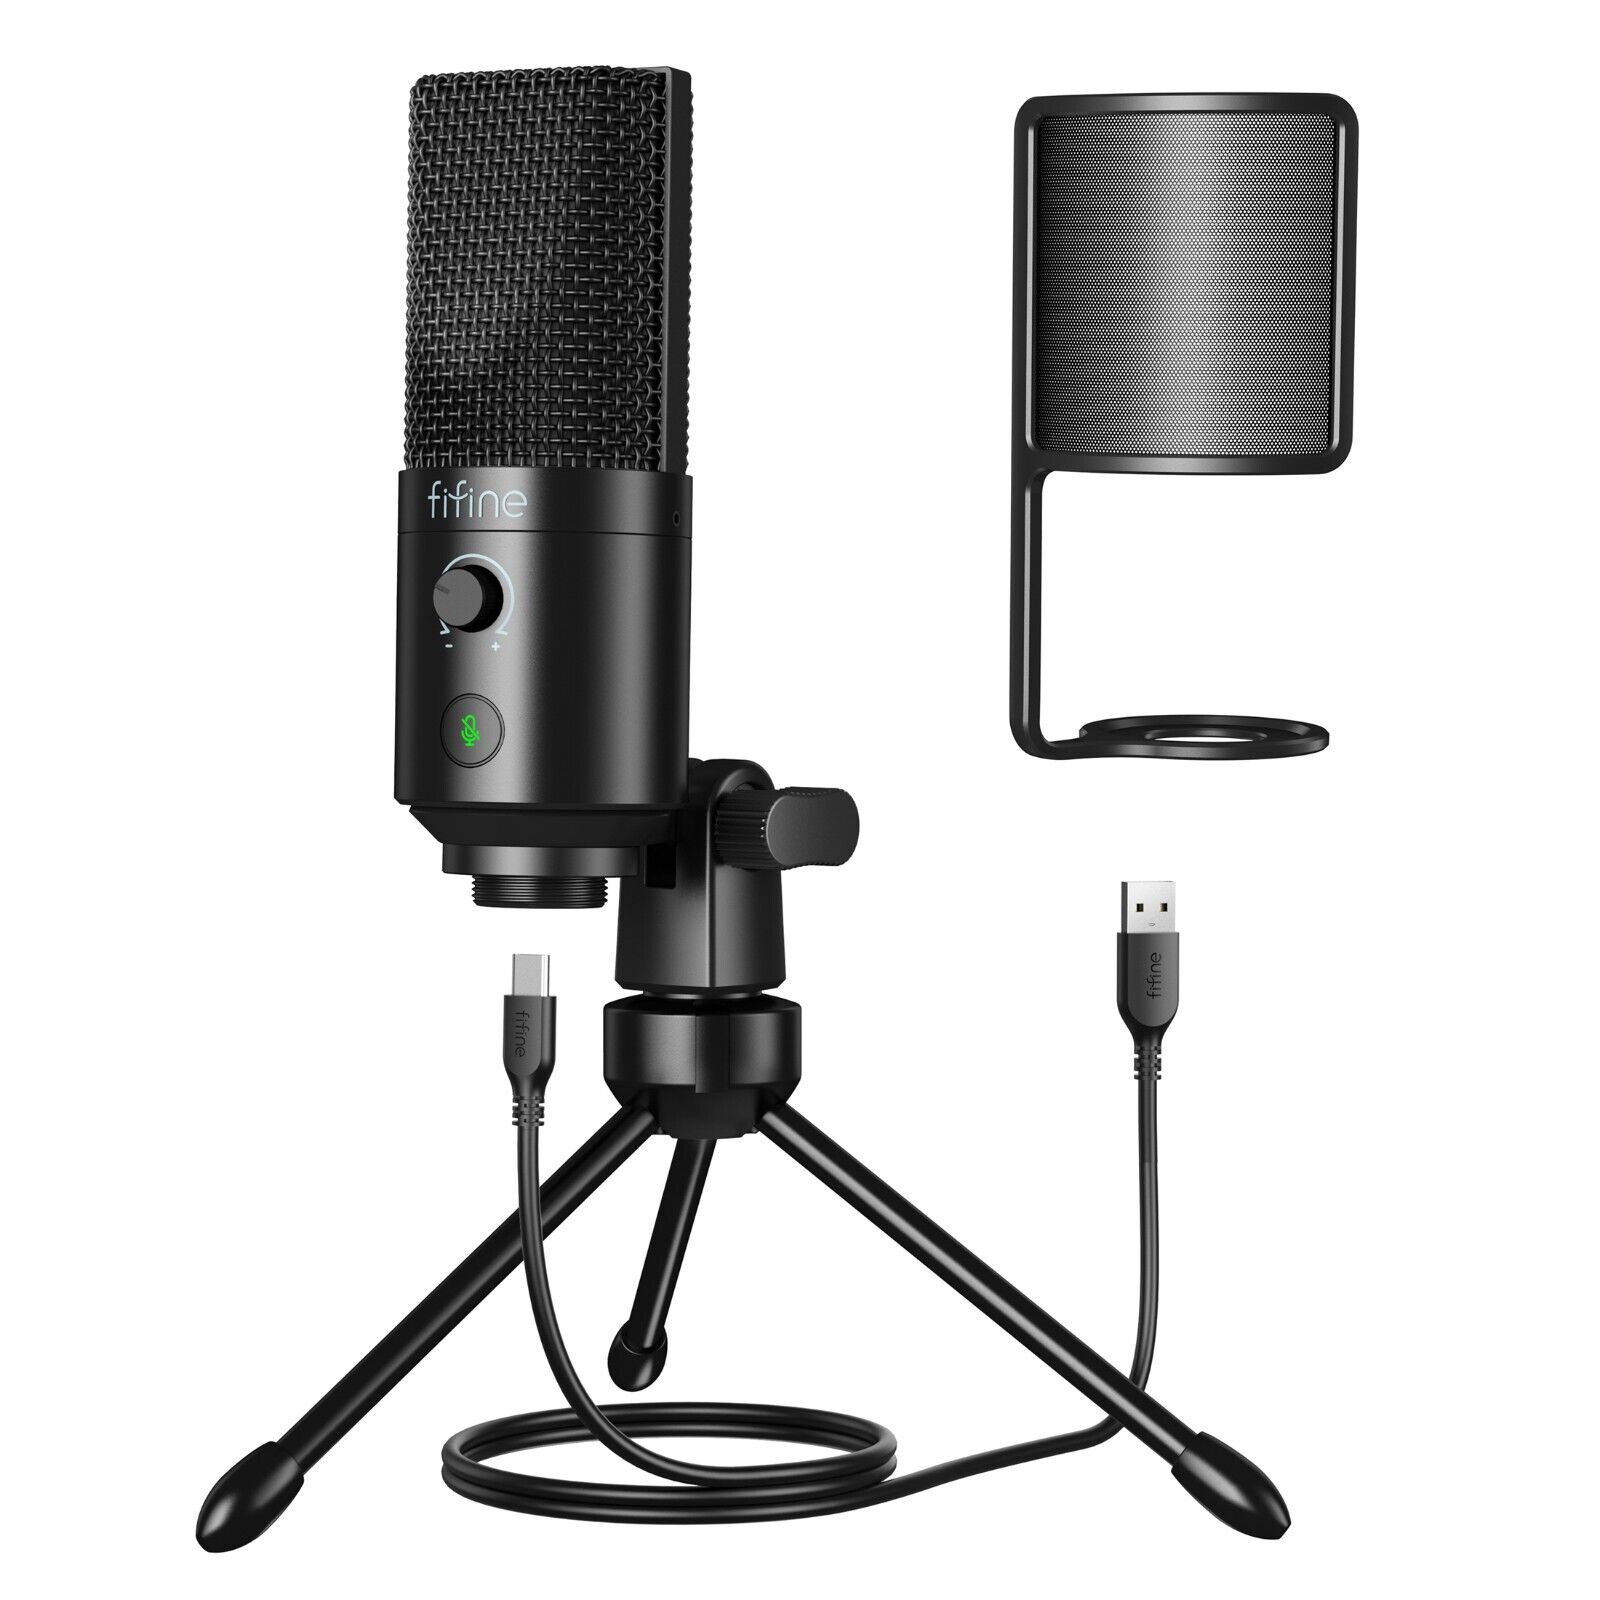 FIFINE USB Gaming Condenser Microphone for Studio Recording Streaming Broadcast